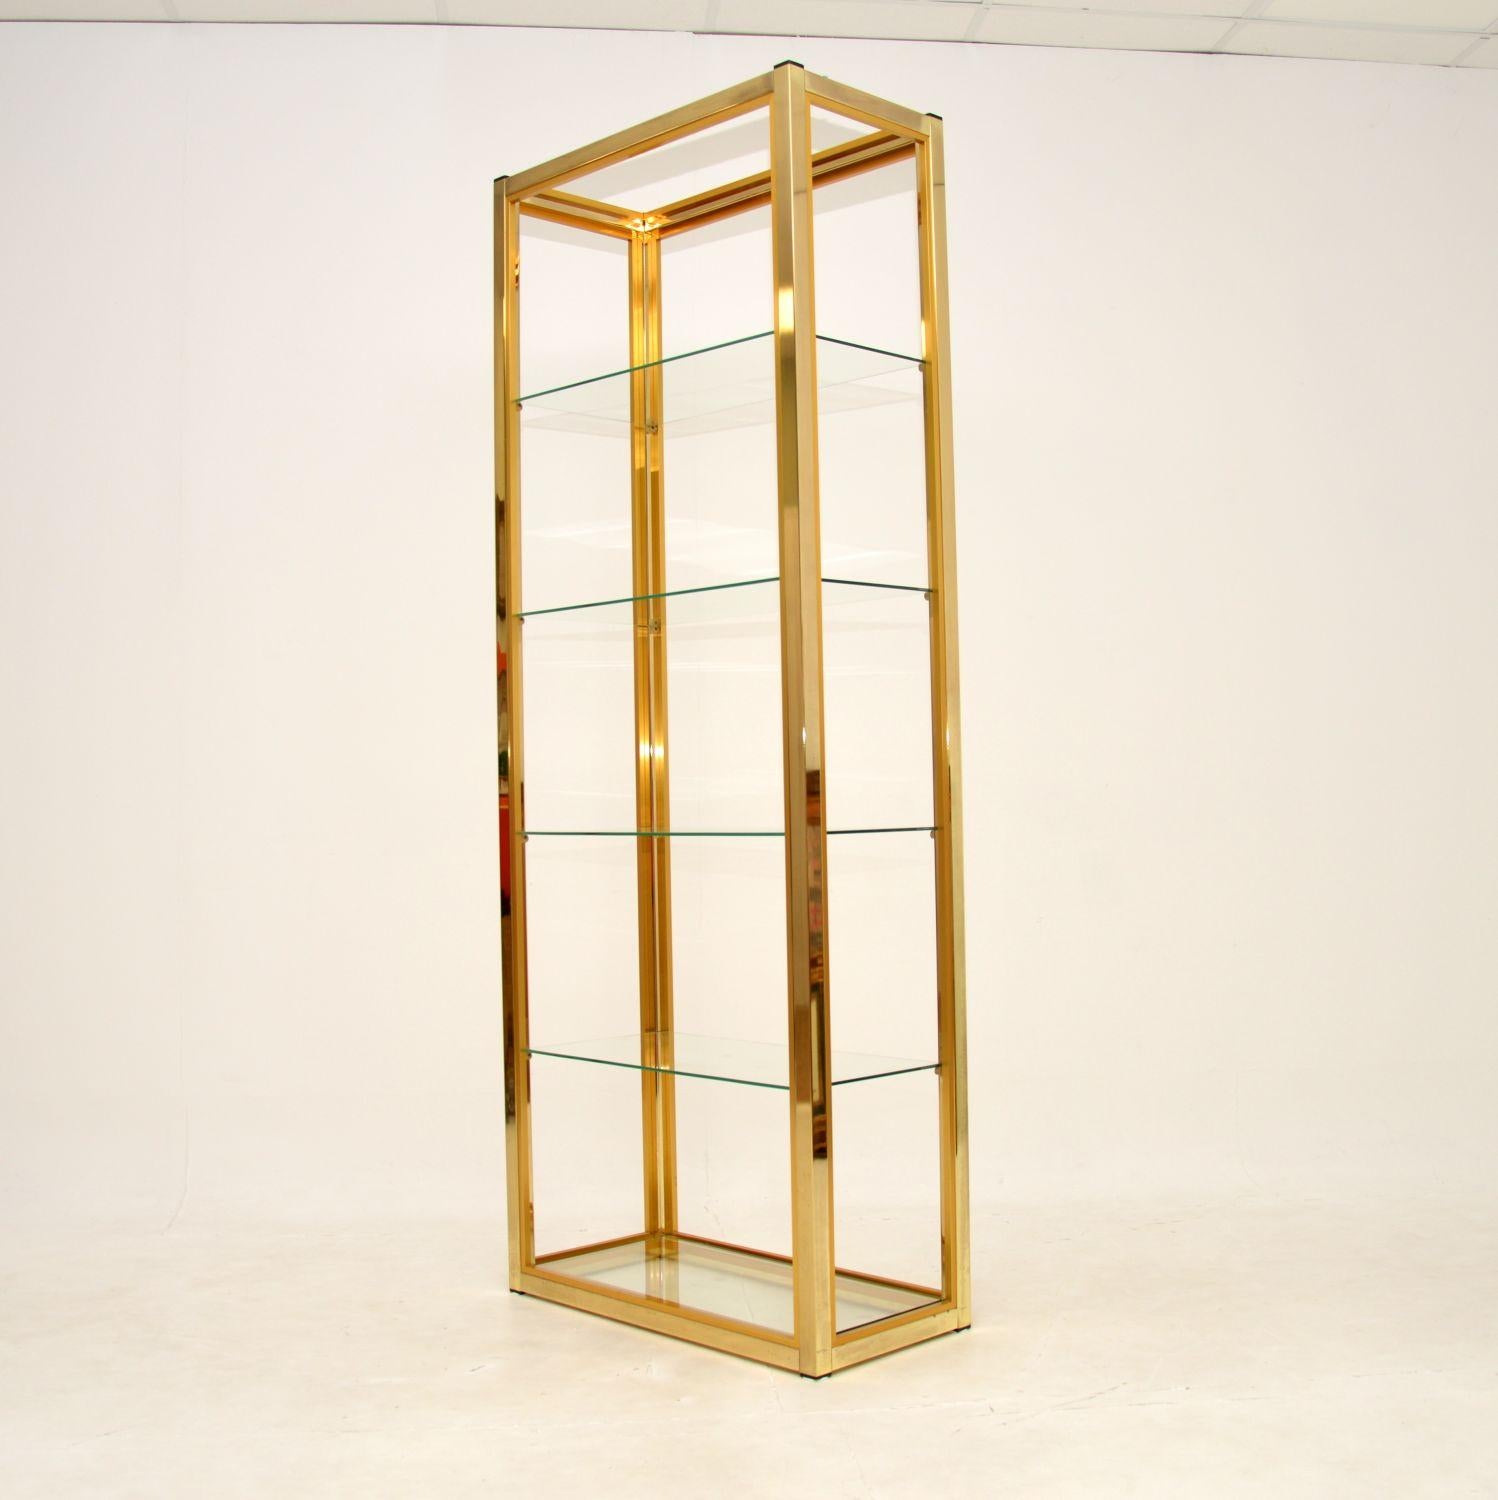 A stunning vintage Italian etagere display cabinet by Zevi. This was designed by Renato Zevi, it was made in Italy in the 1970’s.

This is the less commonly seen version in completely gold finish, it is brass plated aluminium. The quality is